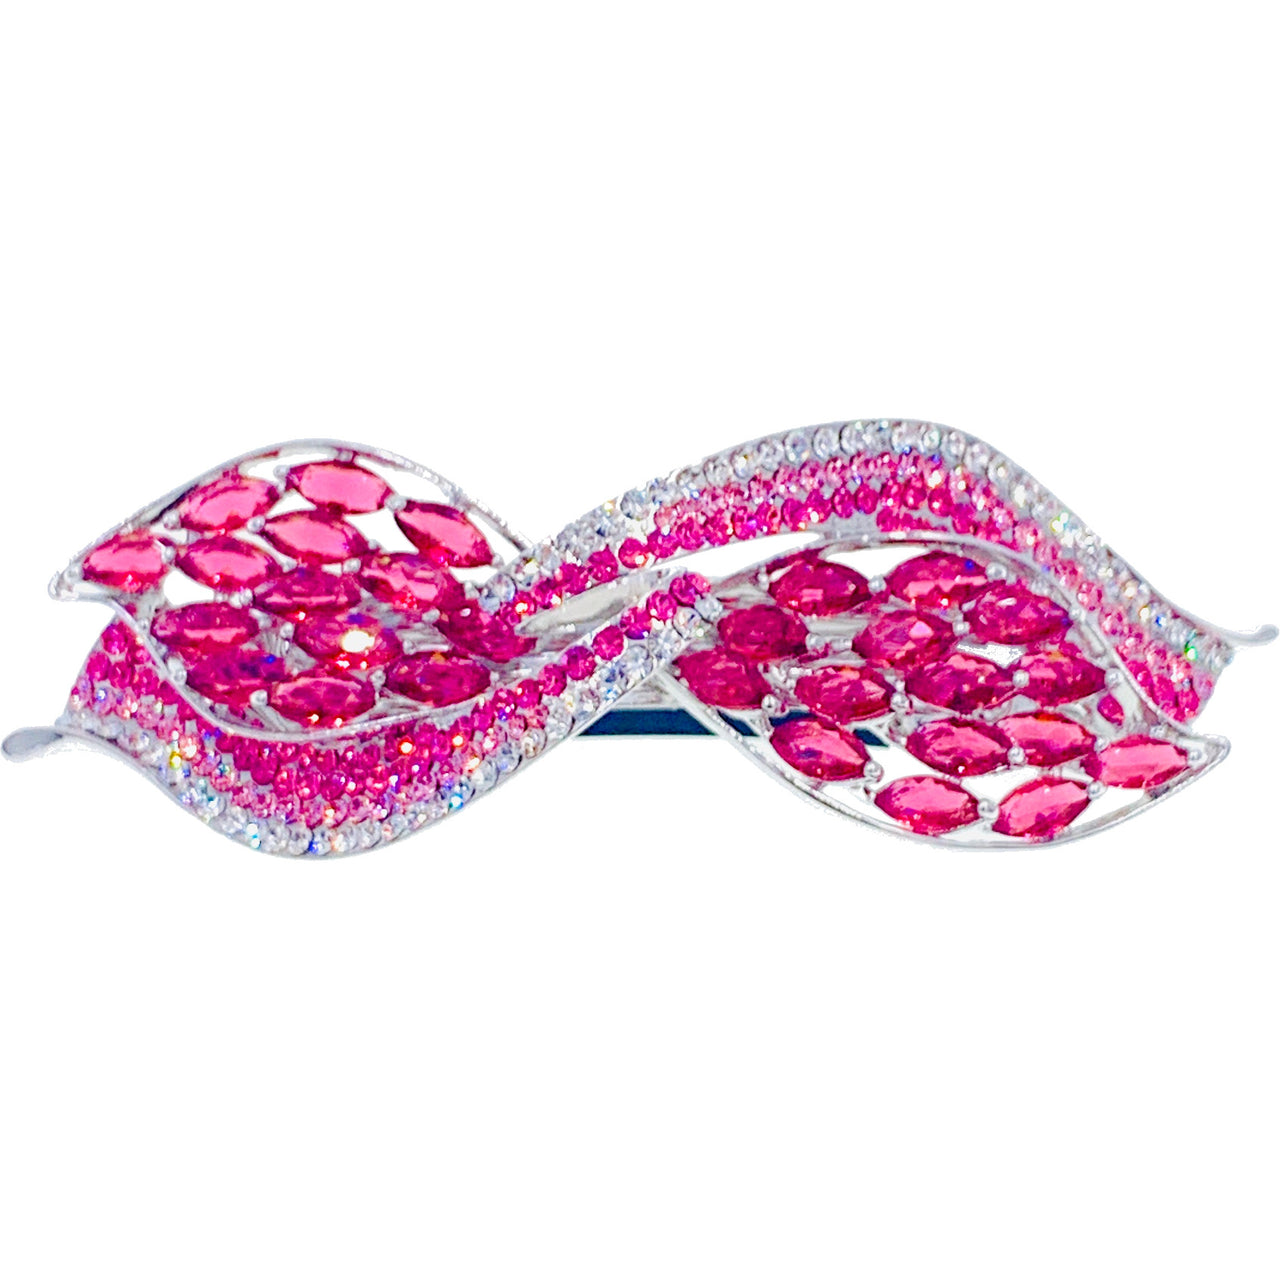 Francisca BOW Barrette Cubic Zirconia and Swarovski Elemental Crystals silver base clear purple pink navy blue, Barrette - MOGHANT